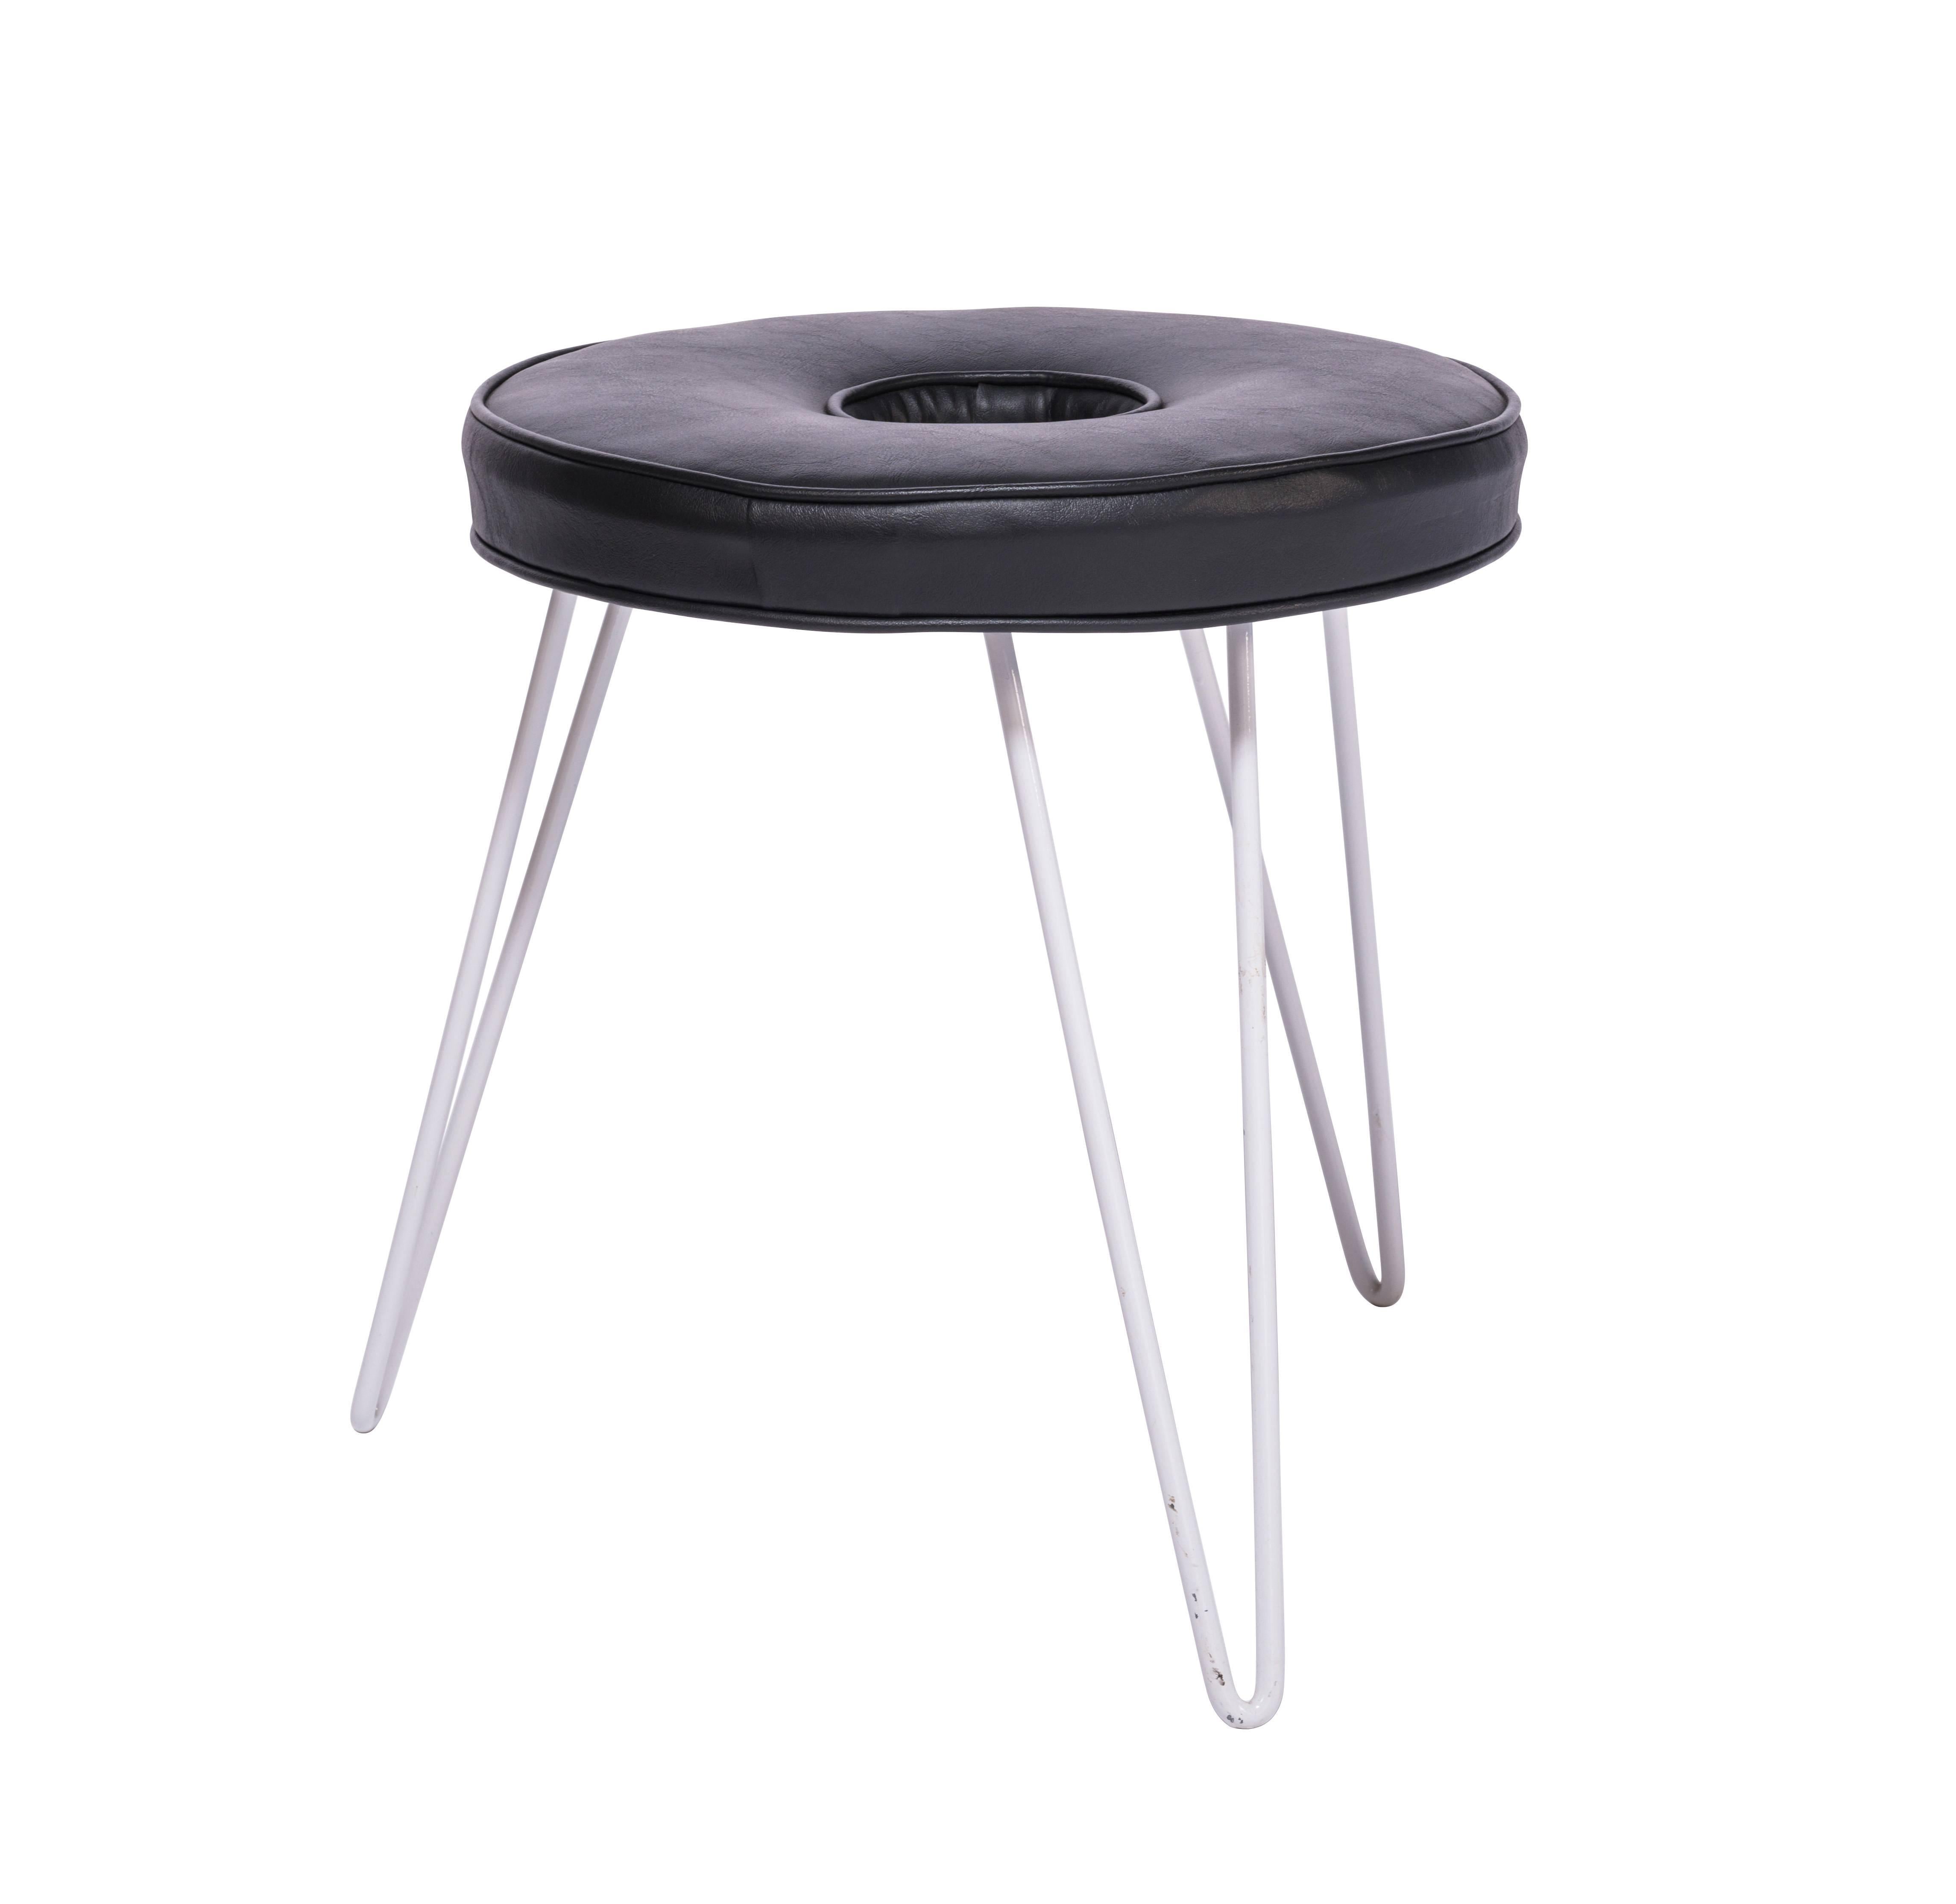 William Armbruster's donut stool for Edgewood Furniture Co. This stool was featured in the Museum of Modern Art's 